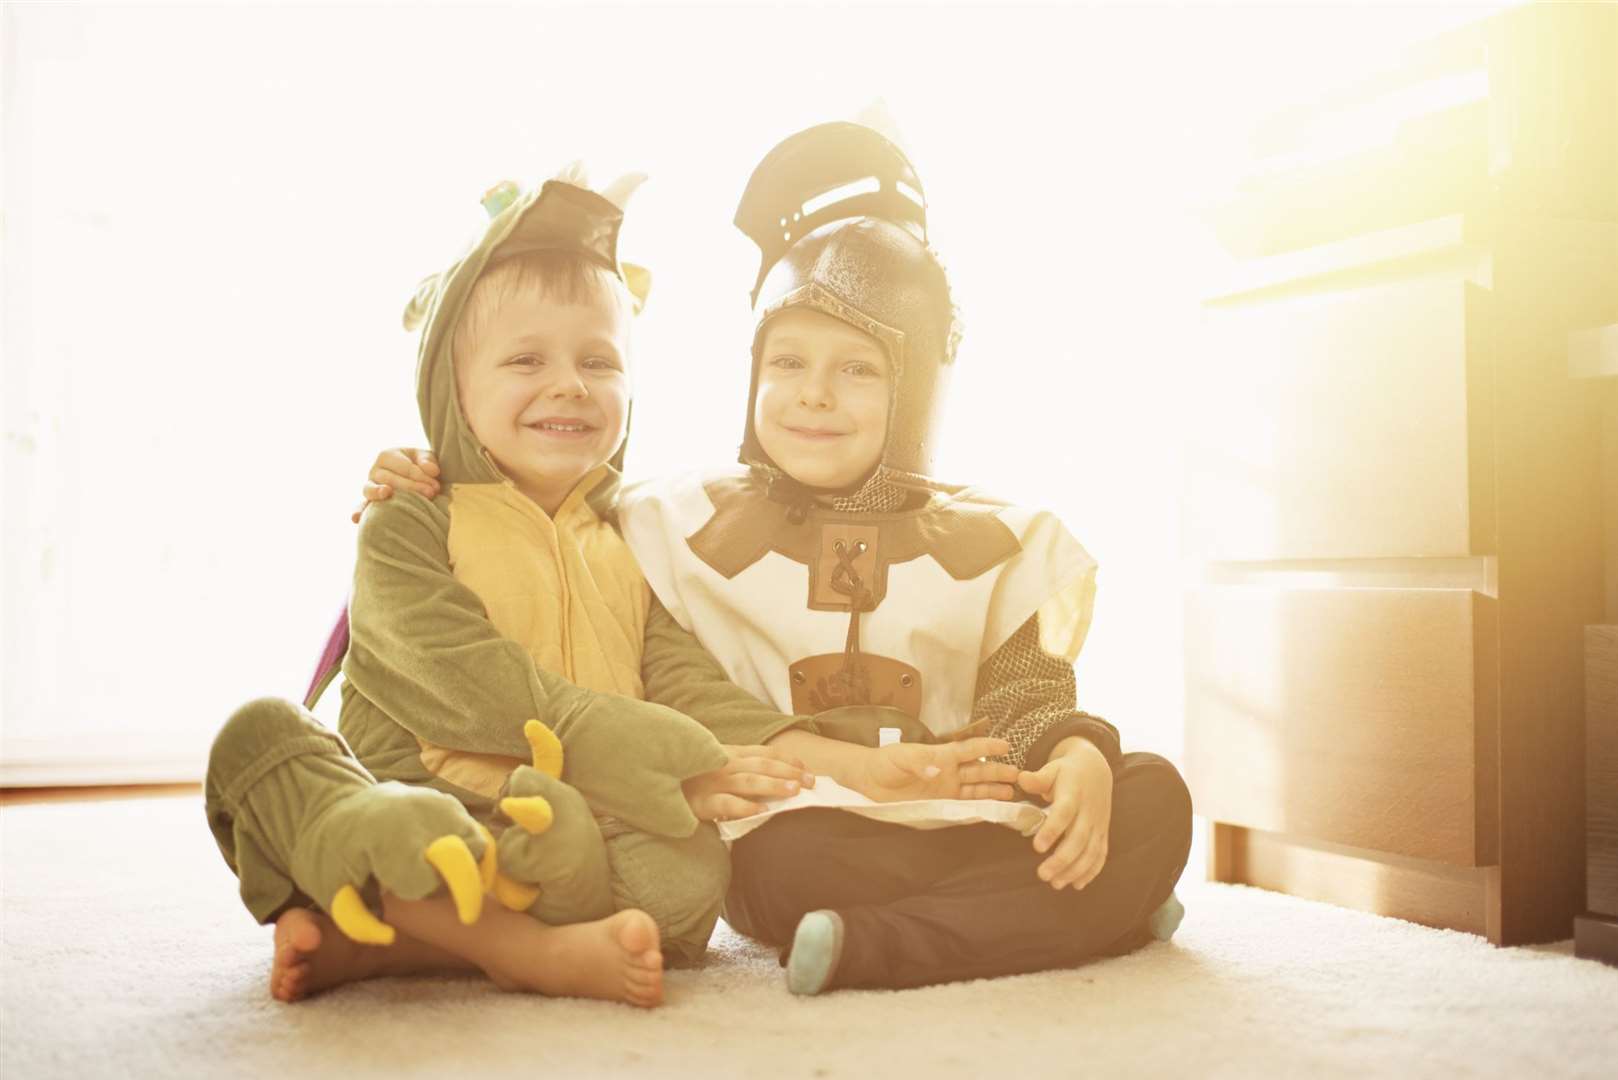 Help your kids create their own dragon costumes and find the dragon eggs. Picture: iStock